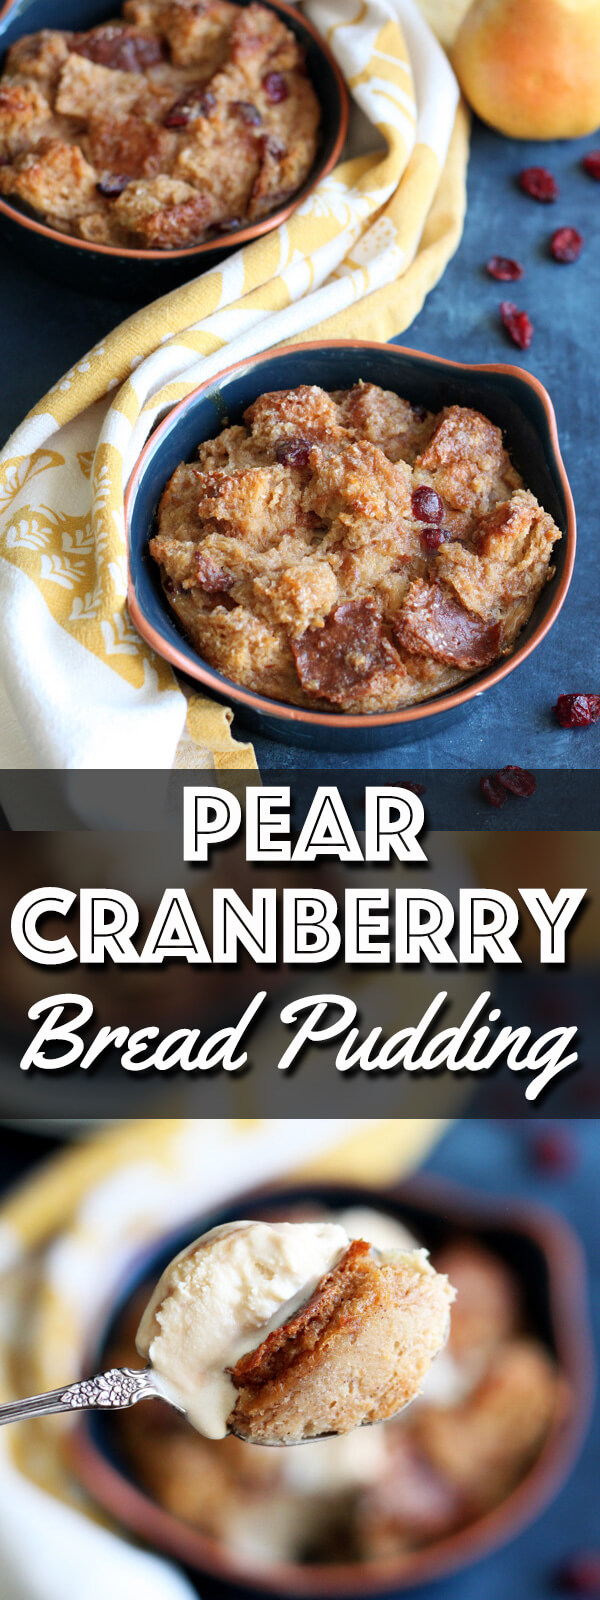 This Pear Cranberry Bread Pudding is a simple yet decadent dessert, baked up nicely in individual ramekins for easy sharing.  | wildwildwhisk.com